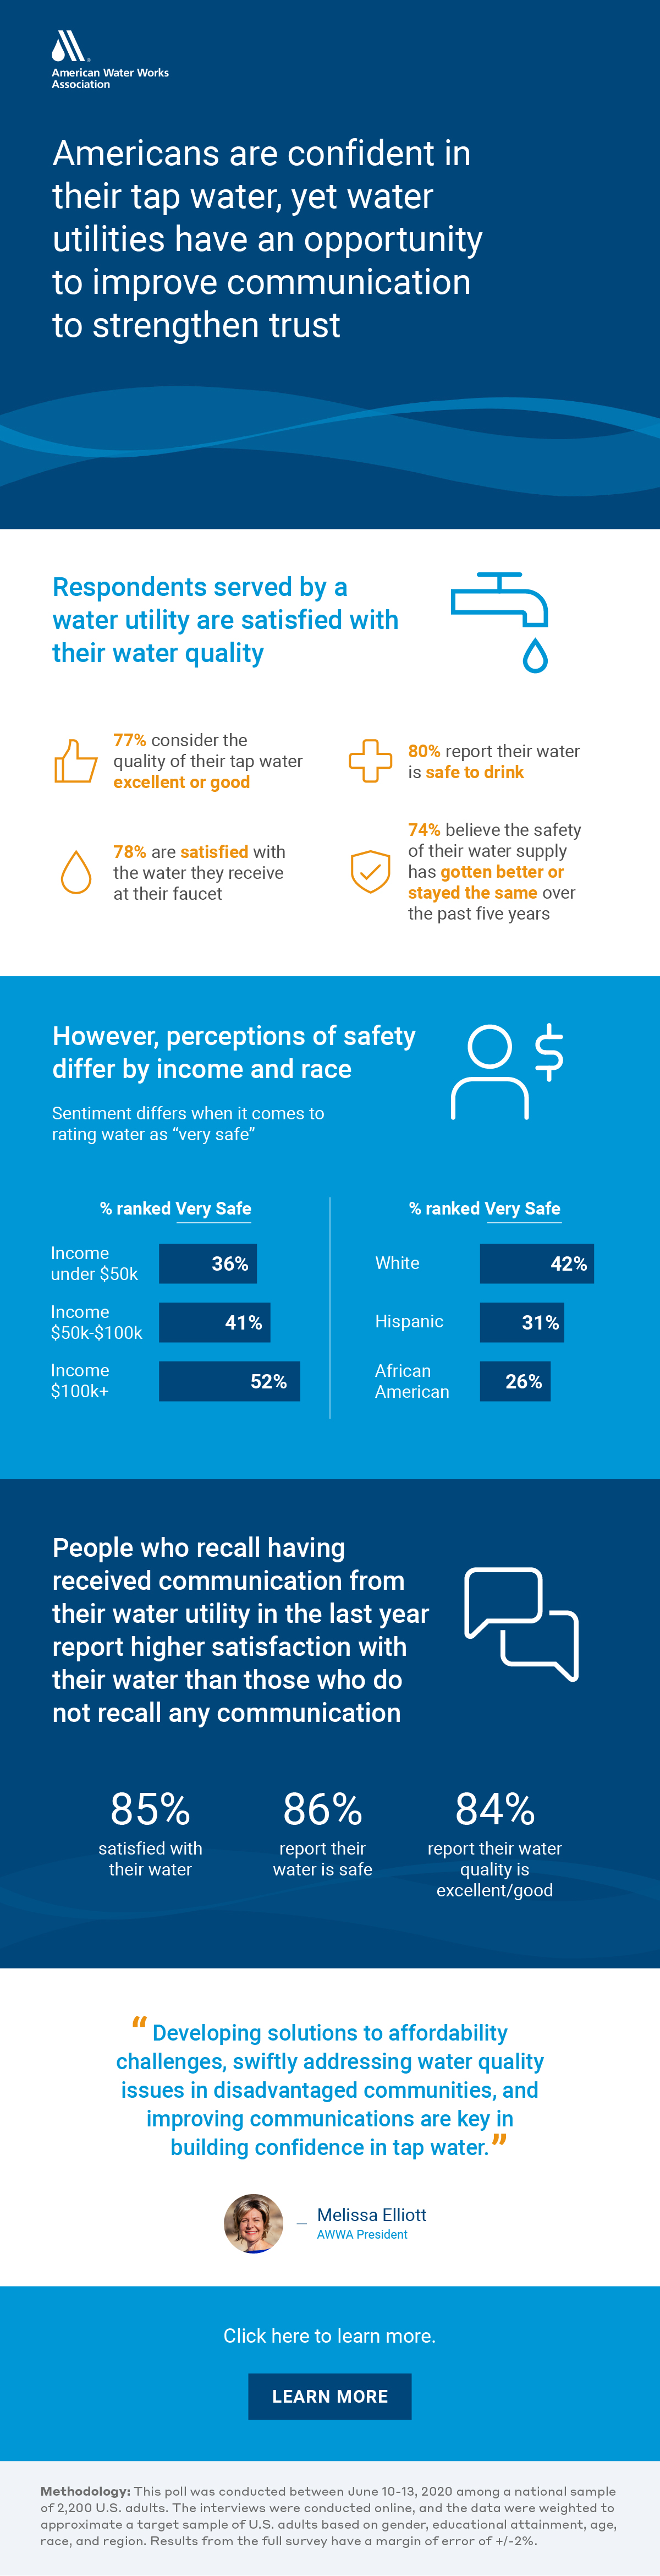 This infographic illustrates some of the findings in the survey